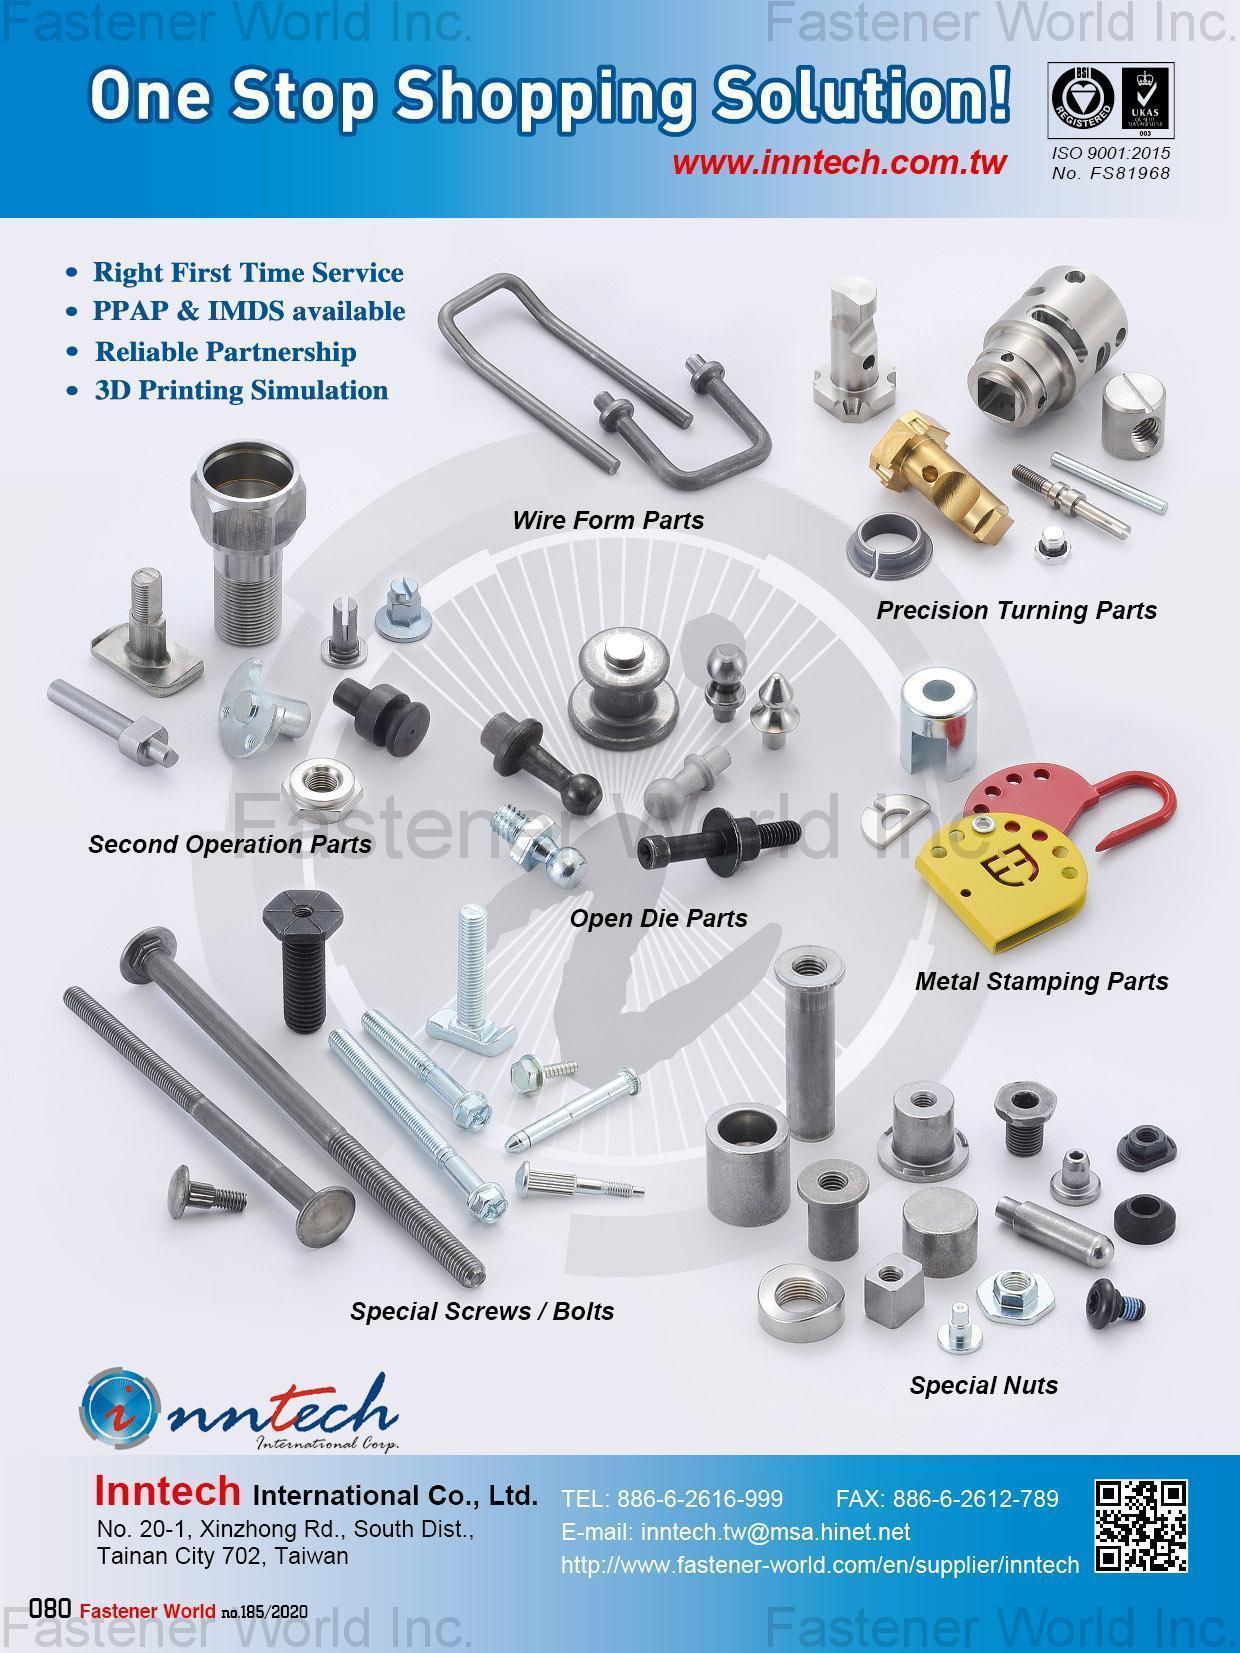  Wire Form Parts, Second Operation Parts, Open Die Parts, Precision Turning Parts, Metal Stamping Parts, Special Screws / Bolts, Special Nuts 